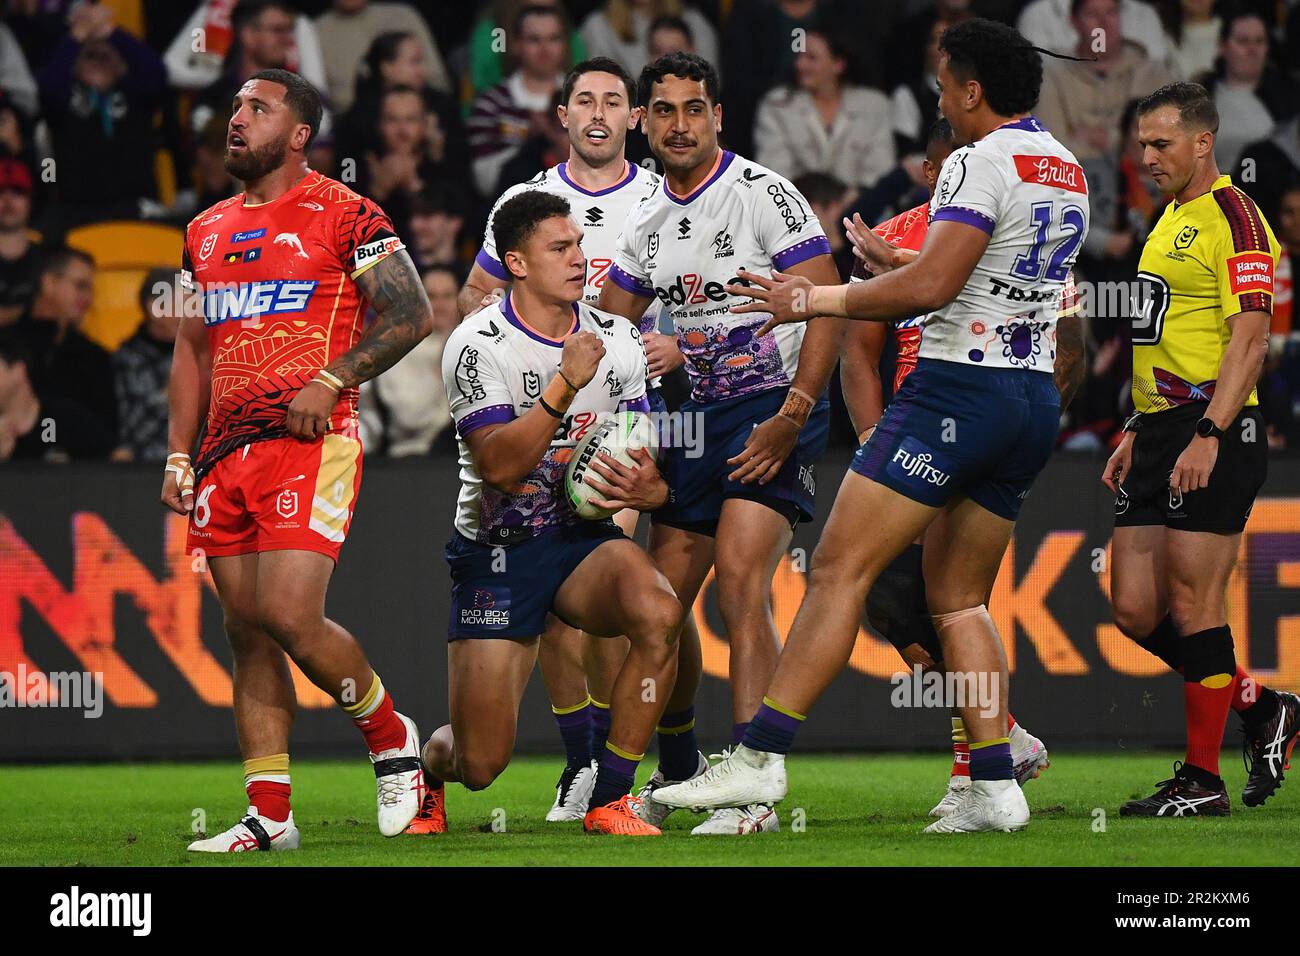 Will Warbrick of the Storm scores a try during the NRL Round 12 match  between the Redcliffe Dolphins and the Melbourne Storm at Suncorp Stadium  in Brisbane, Saturday, May 20, 2023. (AAP